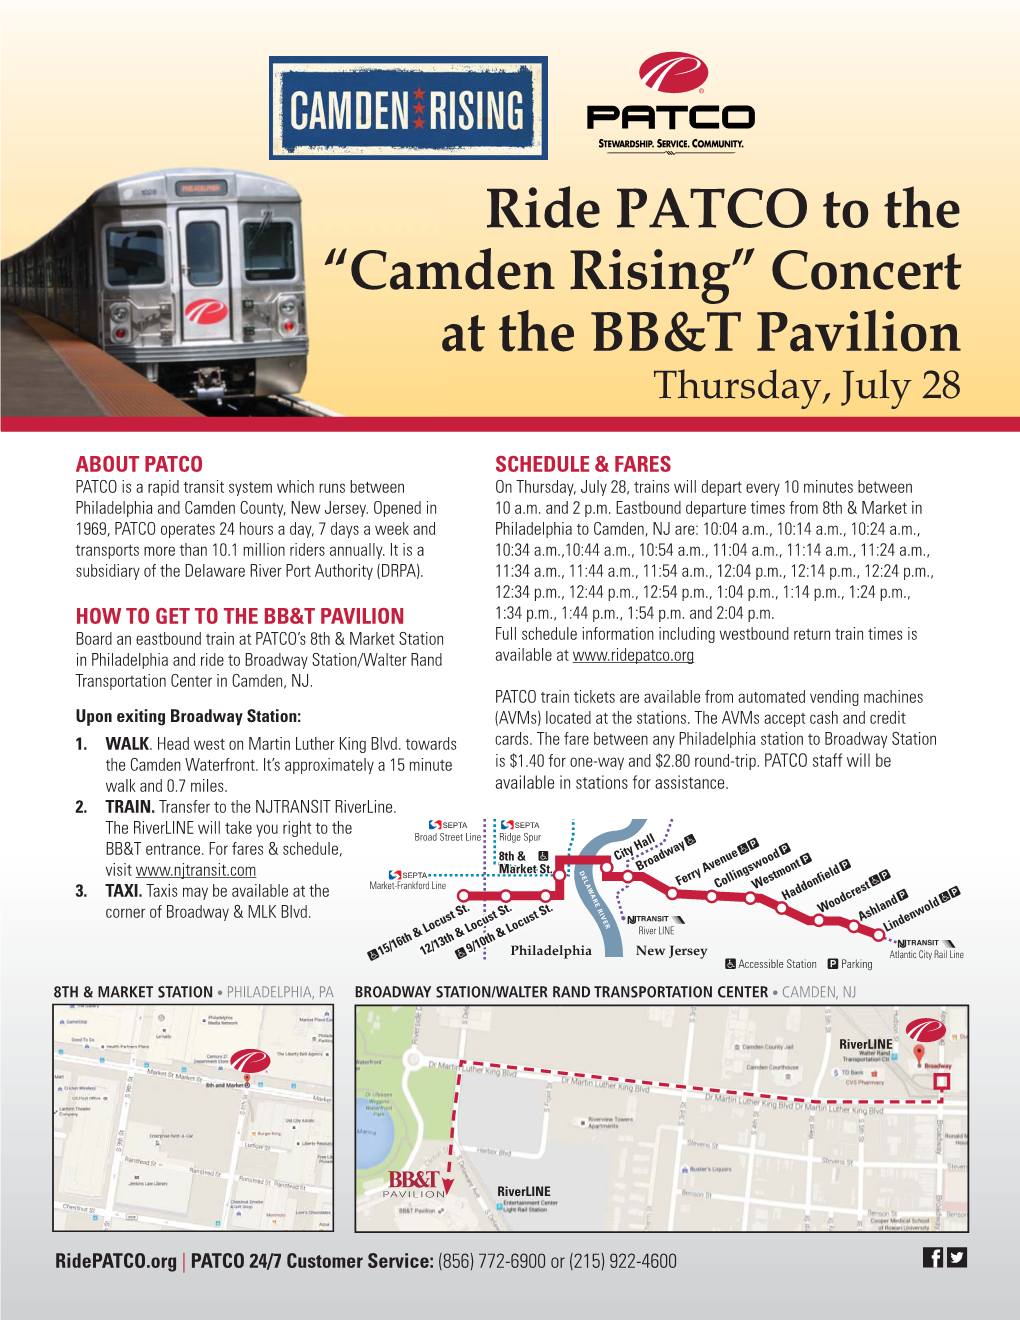 Ride PATCO to the “Camden Rising” Concert at the BB&T Pavilion